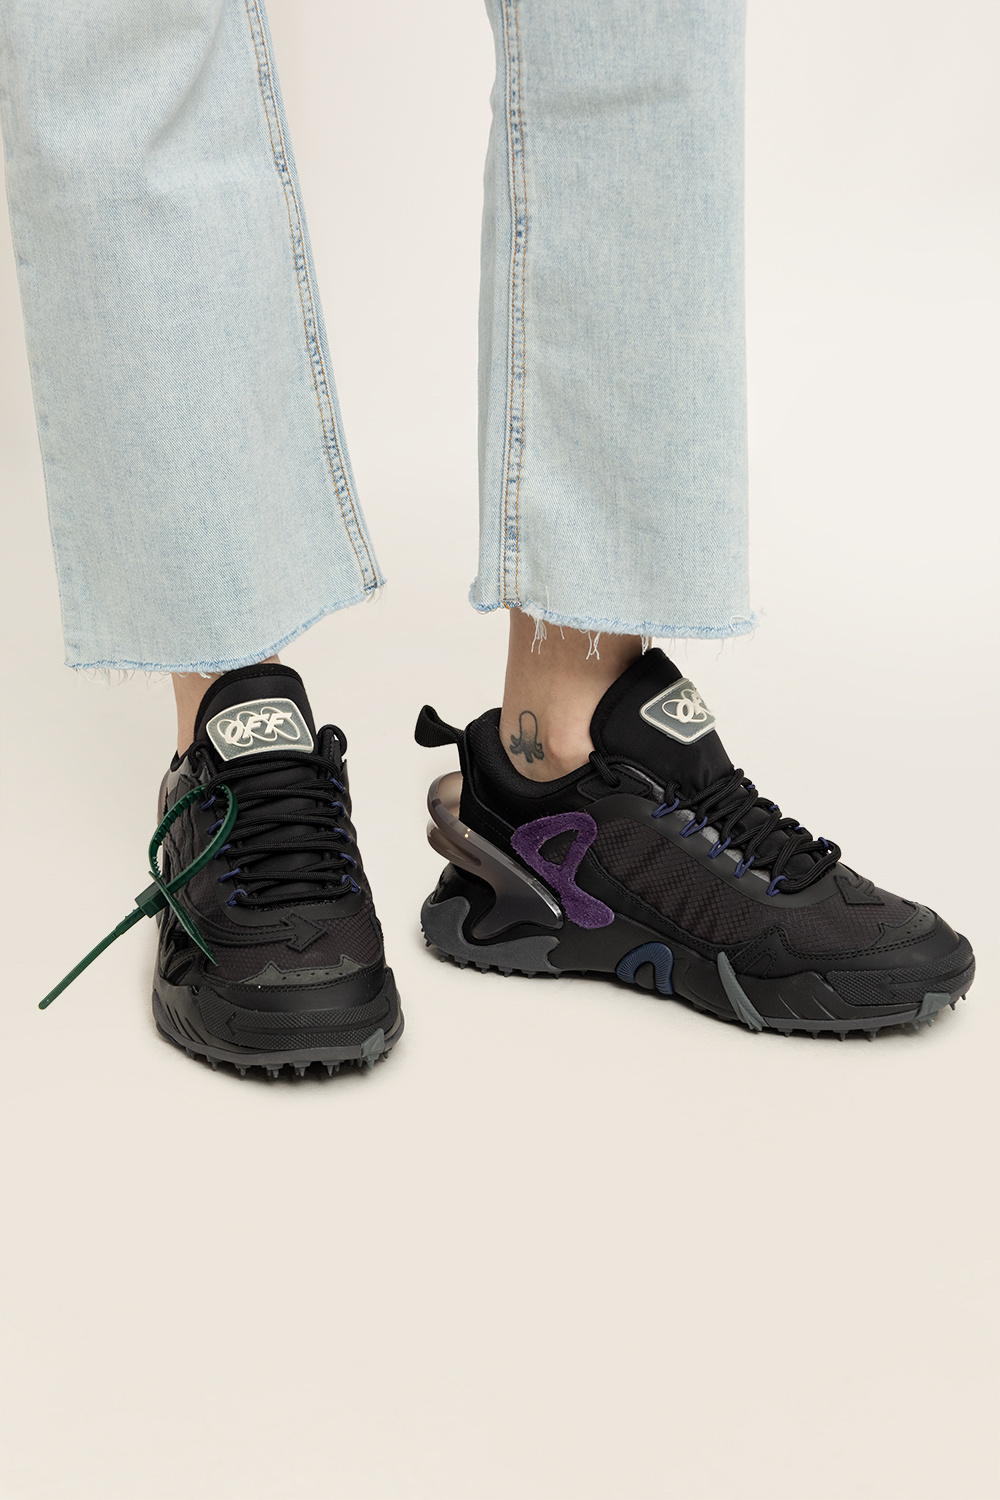 Off-White ‘Odsy 2000’ disponible sneakers